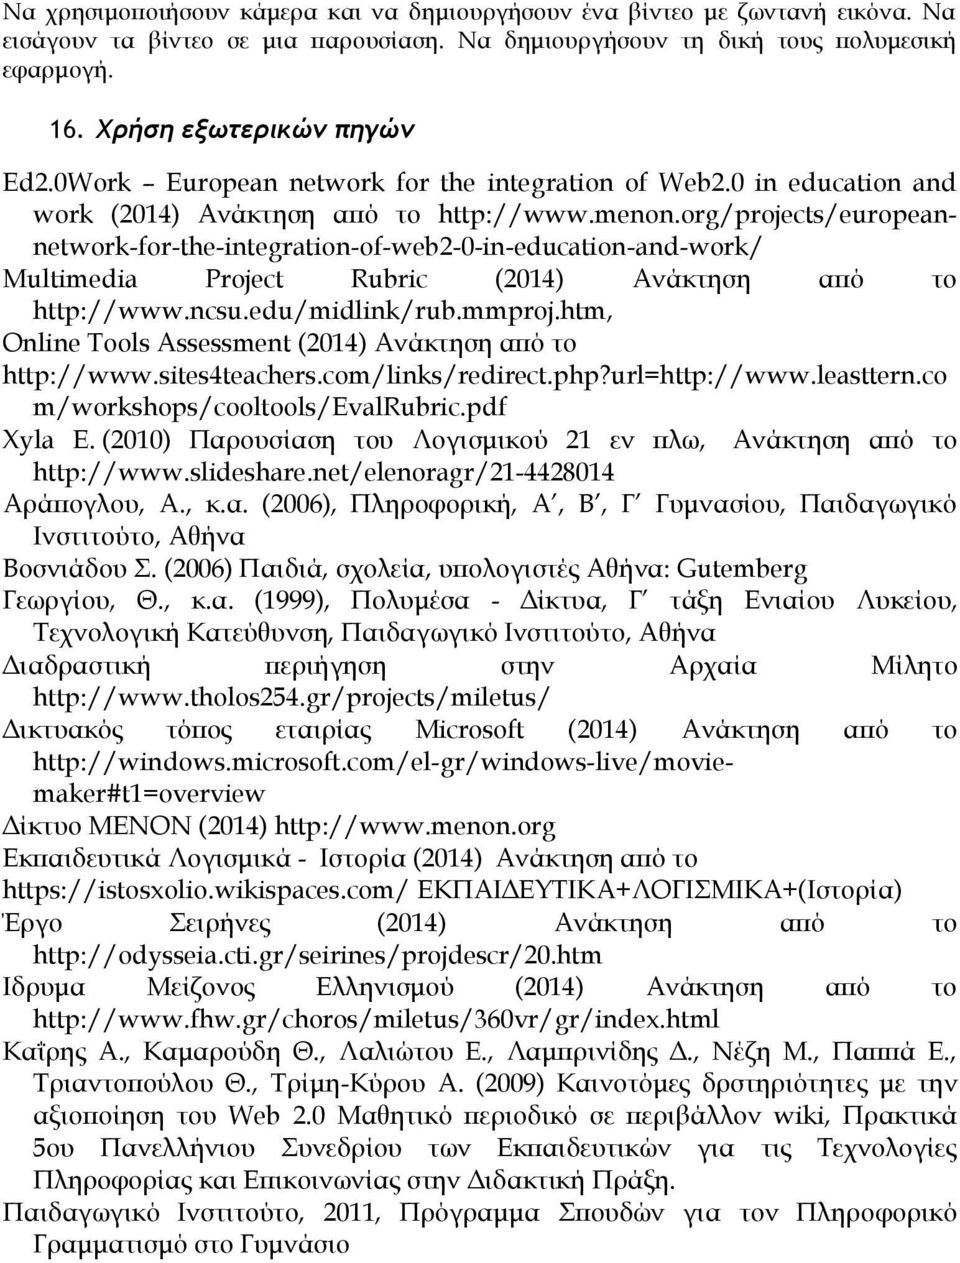 org/projects/europeannetwork-for-the-integration-of-web2-0-in-education-and-work/ Multimedia Project Rubric (2014) Ανάκτηση από το http://www.ncsu.edu/midlink/rub.mmproj.